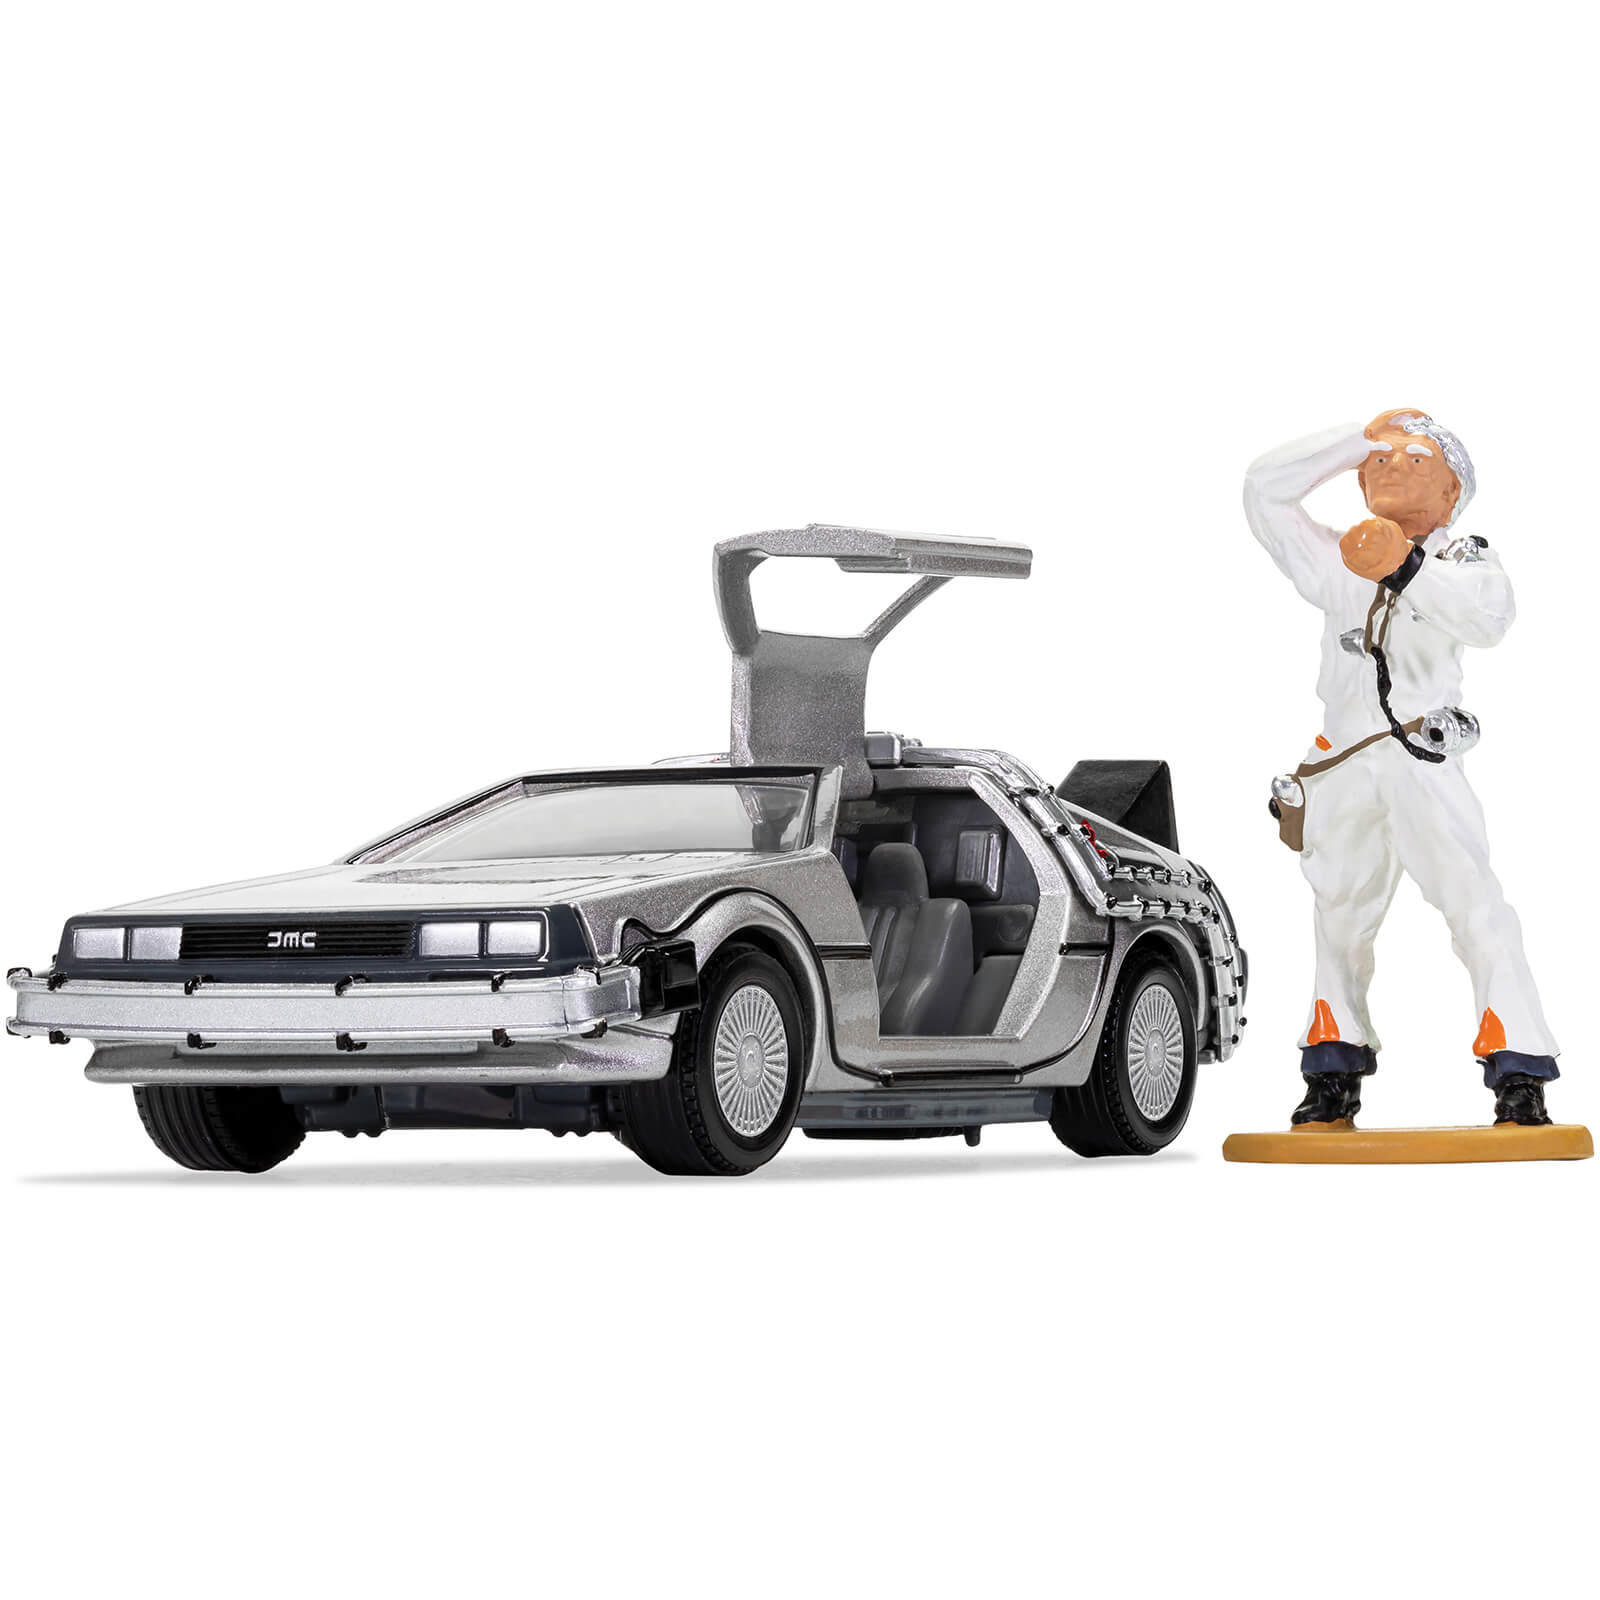 Image of Back to the Future DeLorean and Doc Brown Figure Model Set - Scale 1:36